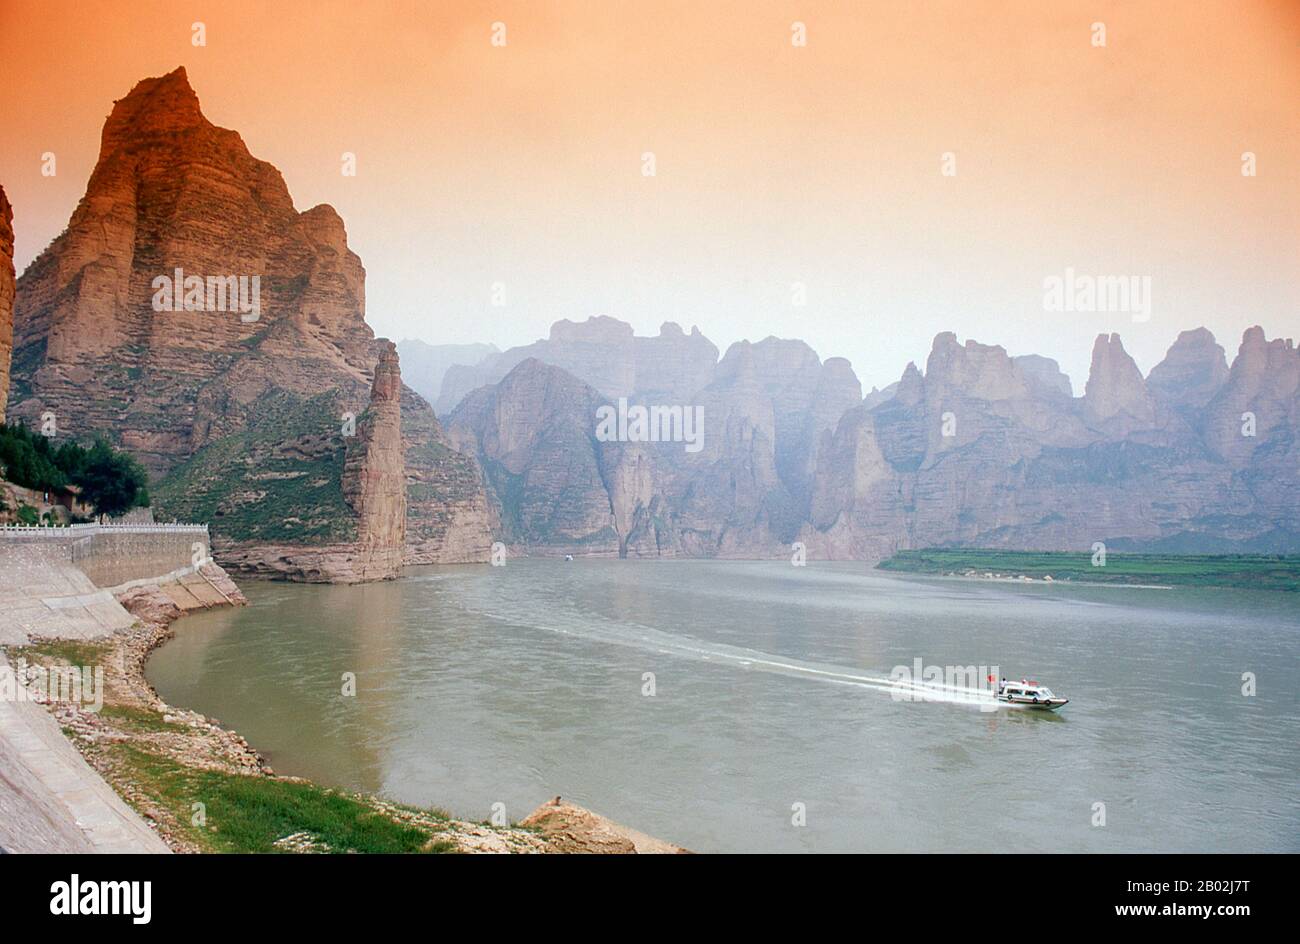 The Yellow River (Huang He), is the most important waterway in China. The region around the confluence of the Huang He and Wei rivers formed the cradle of Chinese civilisation. The river is the third-longest river in Asia, following the Yangtze River and Yenisei River, and the sixth-longest in the world at an estimated length of 5,464 km (3,395 mi). Stock Photo